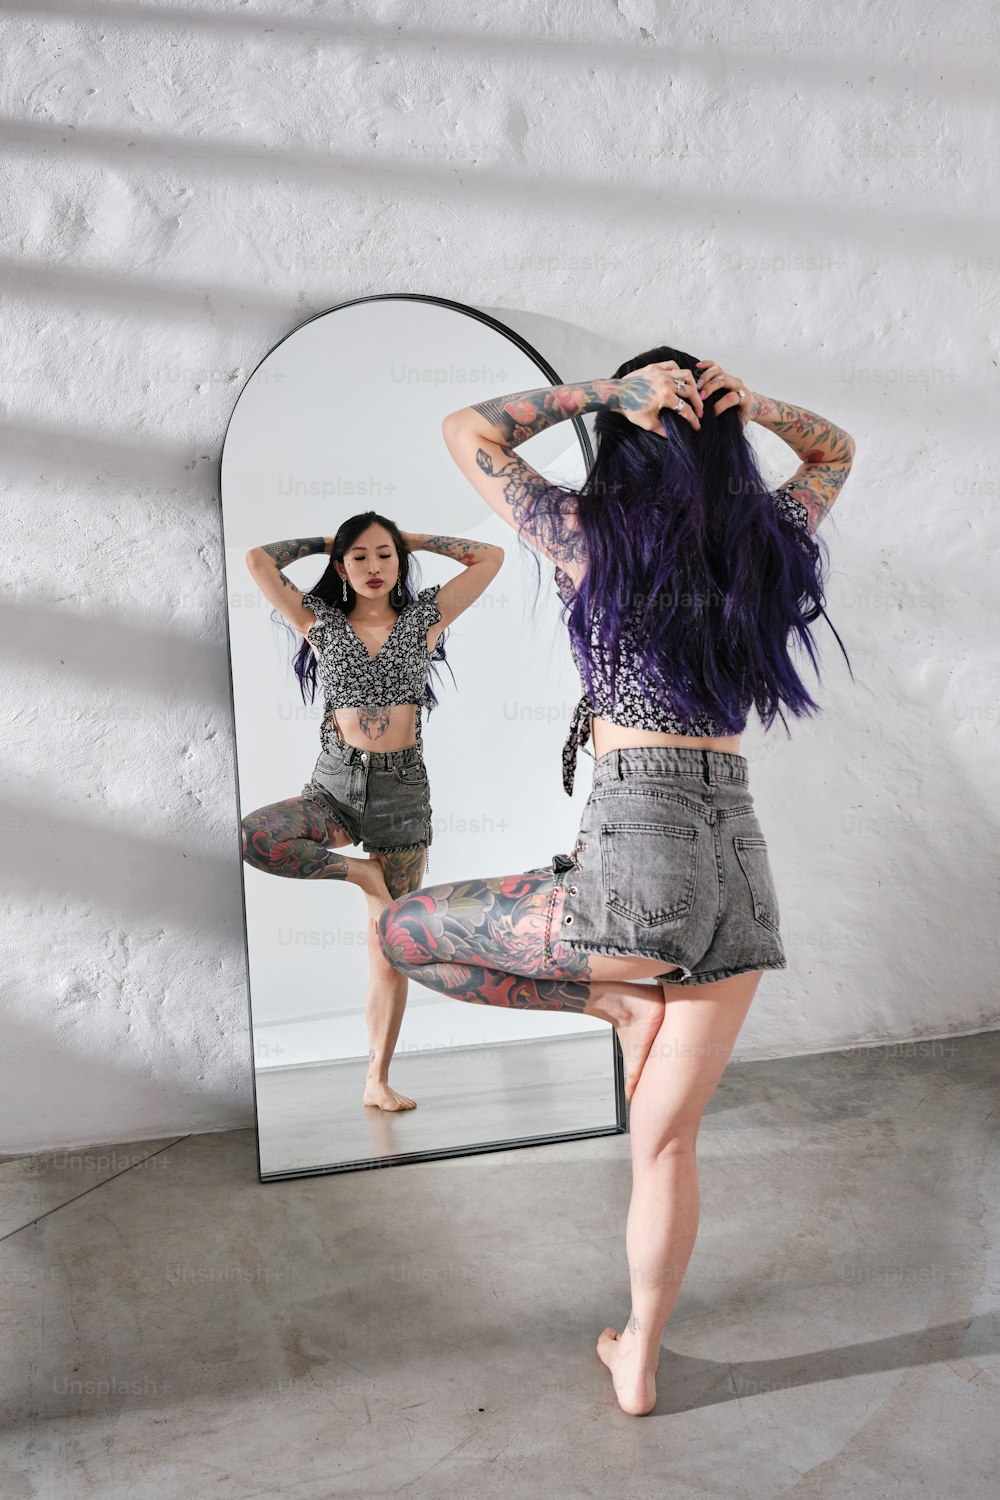 a woman with purple hair standing in front of a mirror